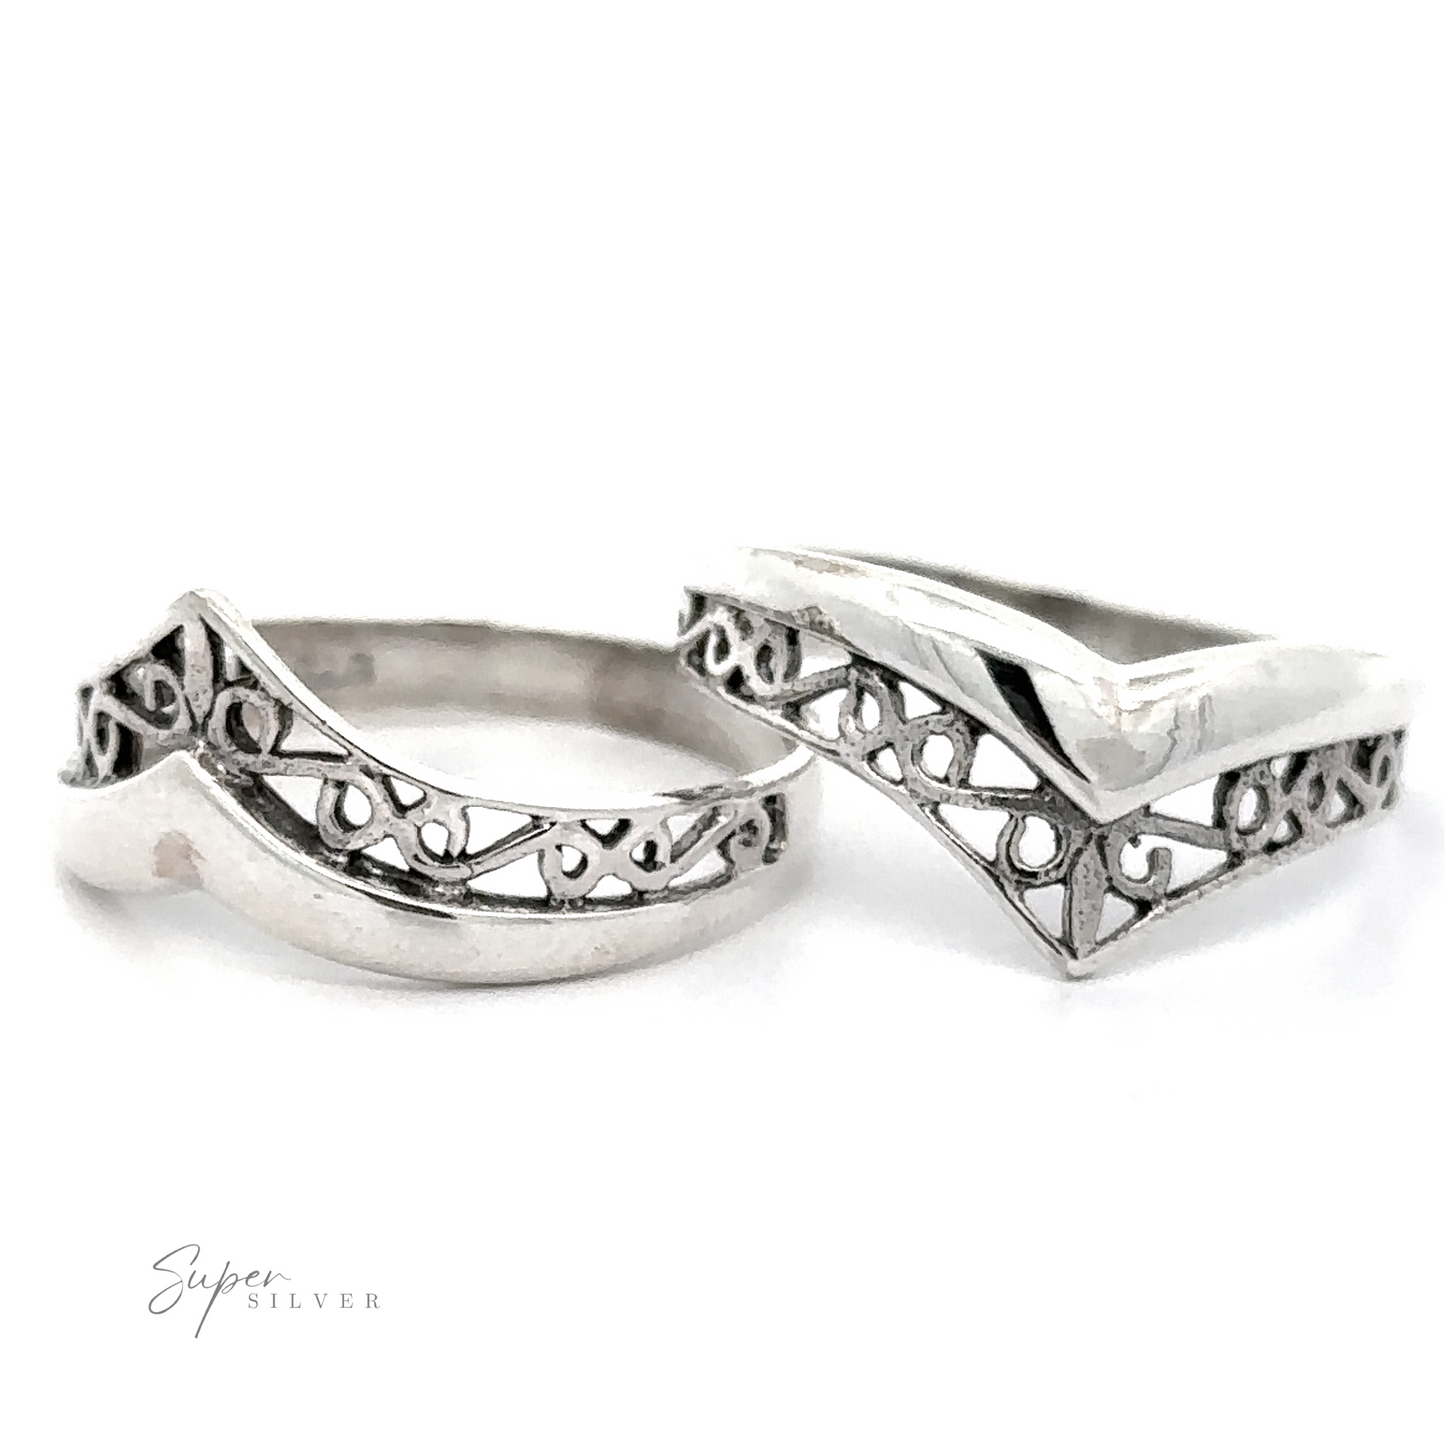 Two Filigree Chevron Rings with intricate designs on them, combining unique looks and a touch of victorian charm.